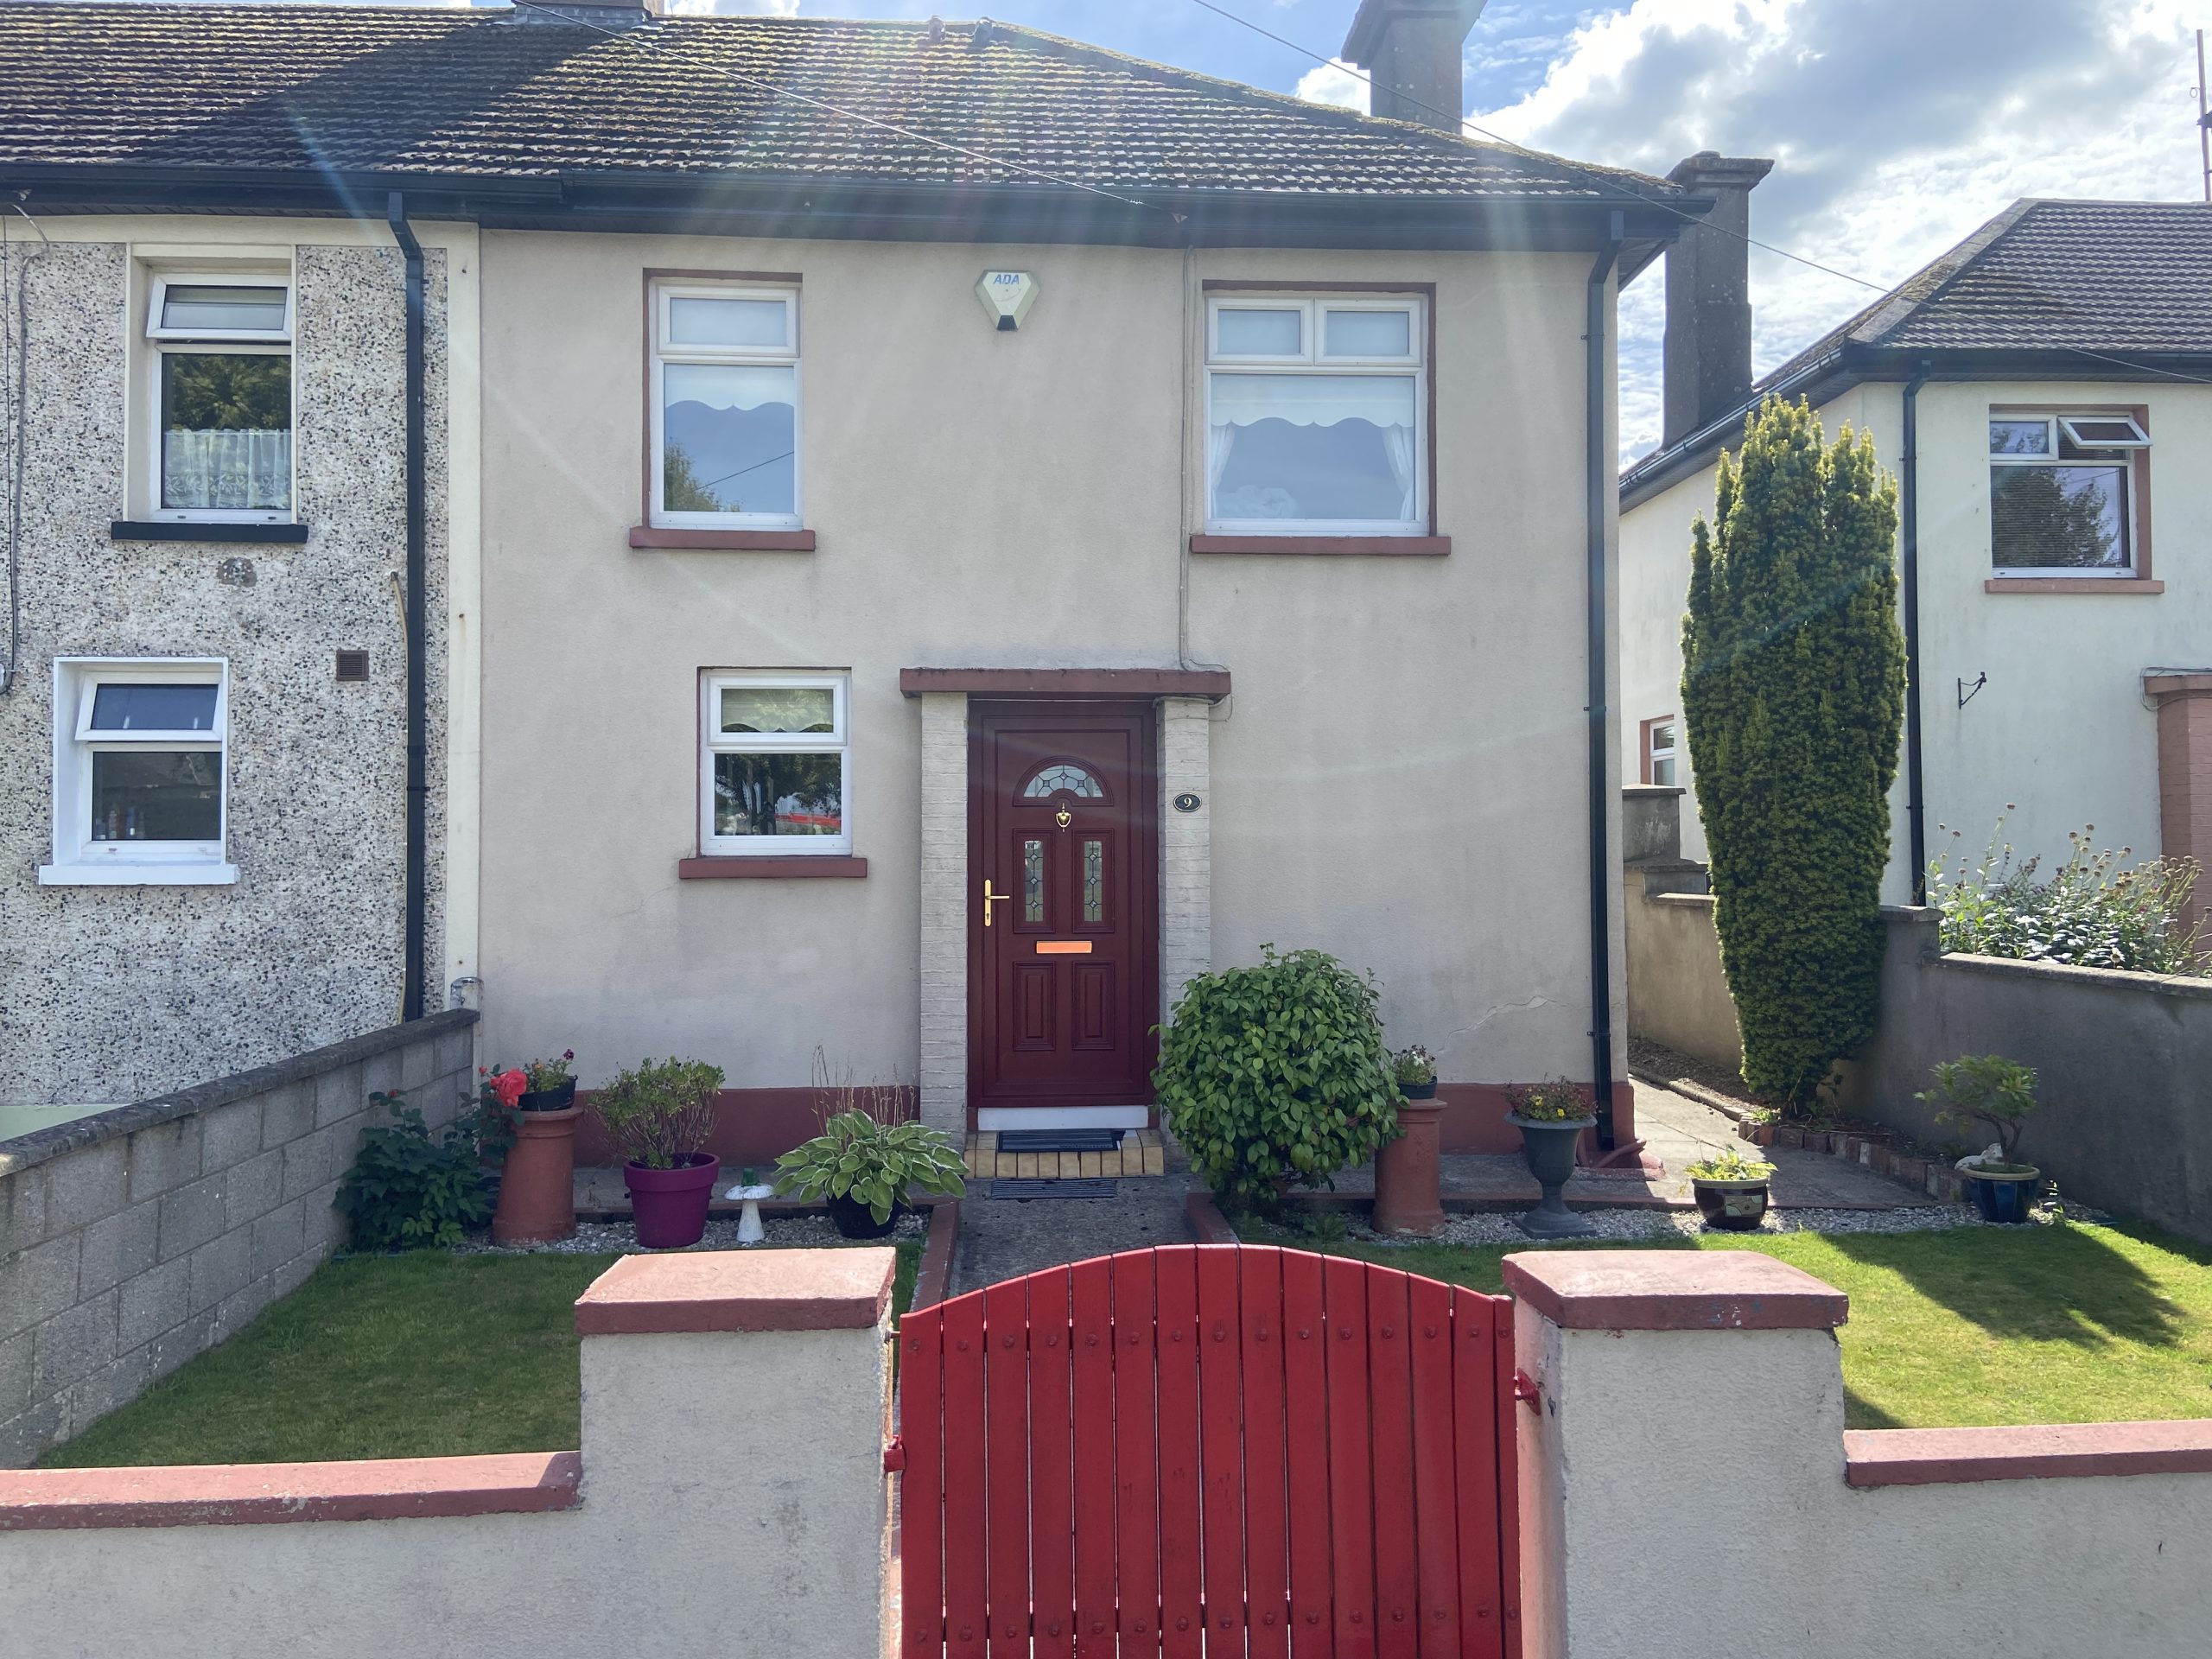 3 Bedroom Family Home | 9 Marian Square, Fermoy P61 HK06